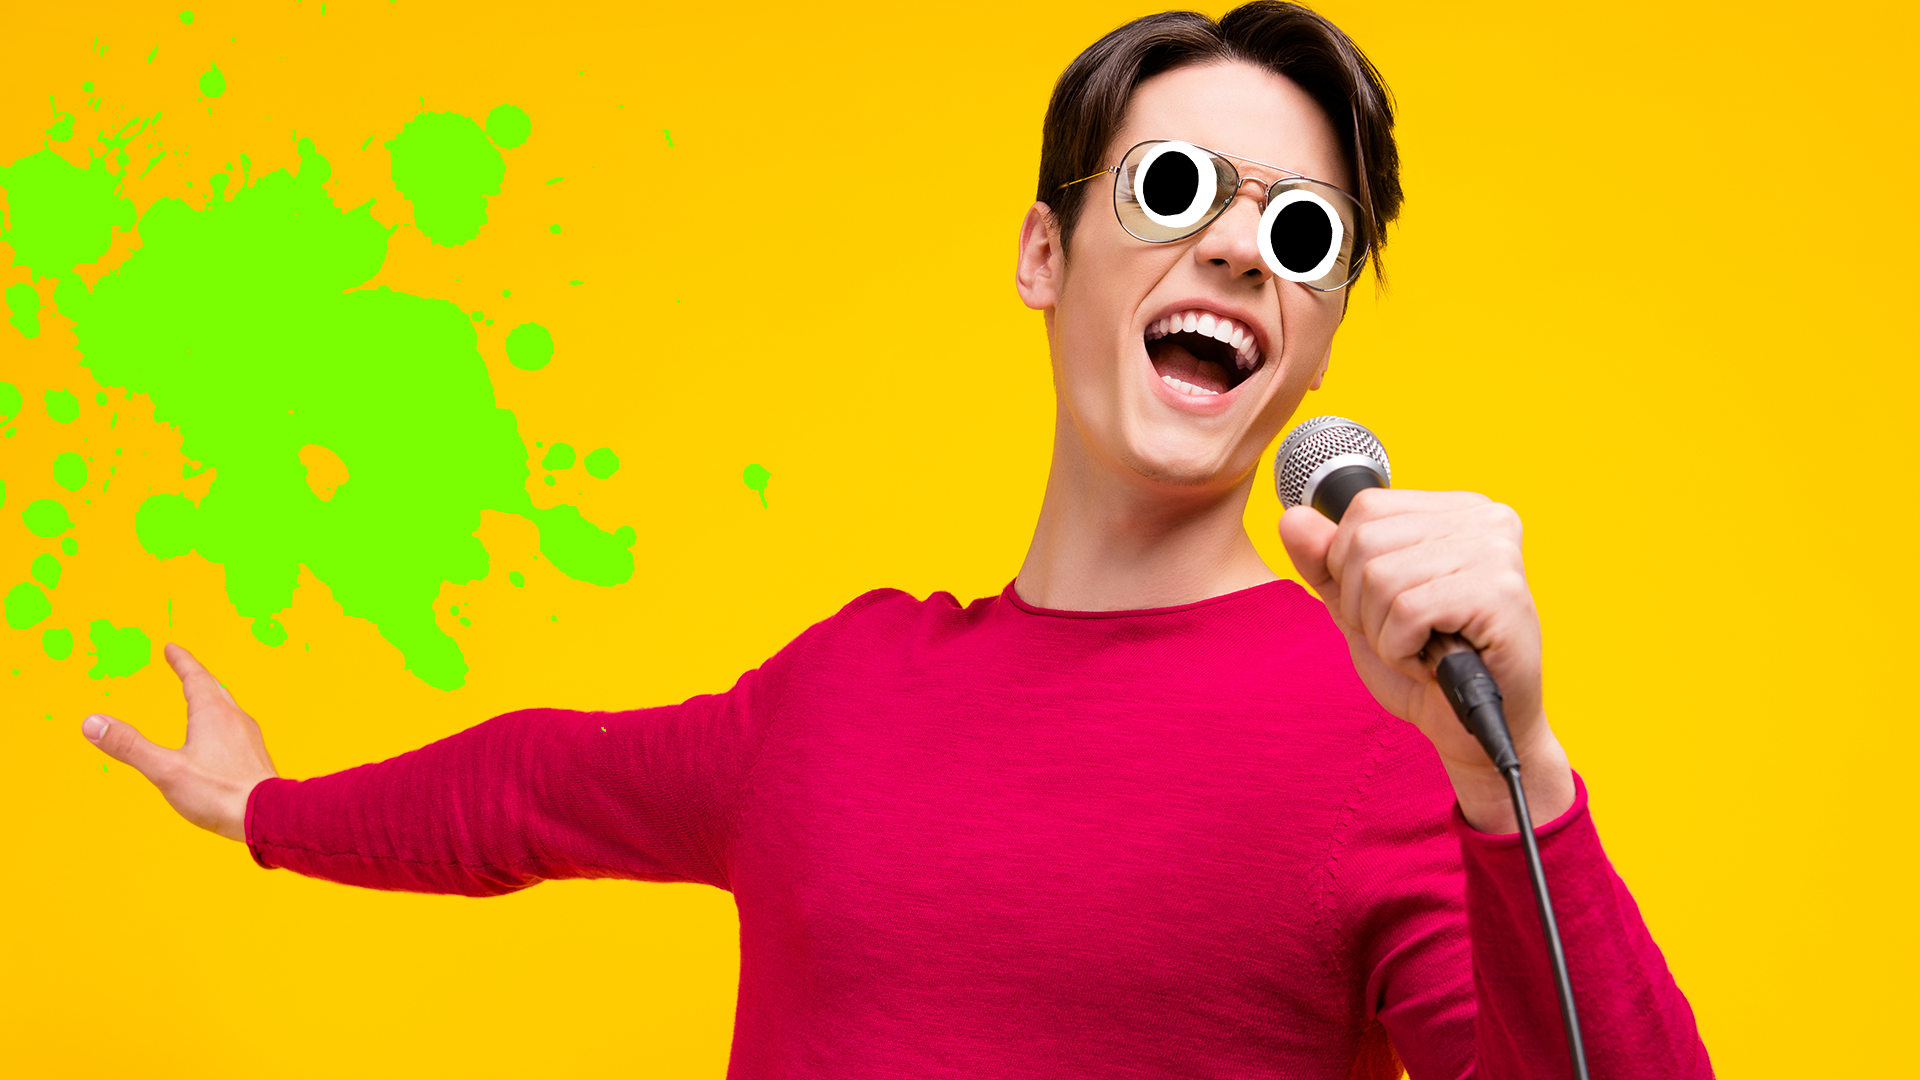 Man singing into mic on yellow background with green splat